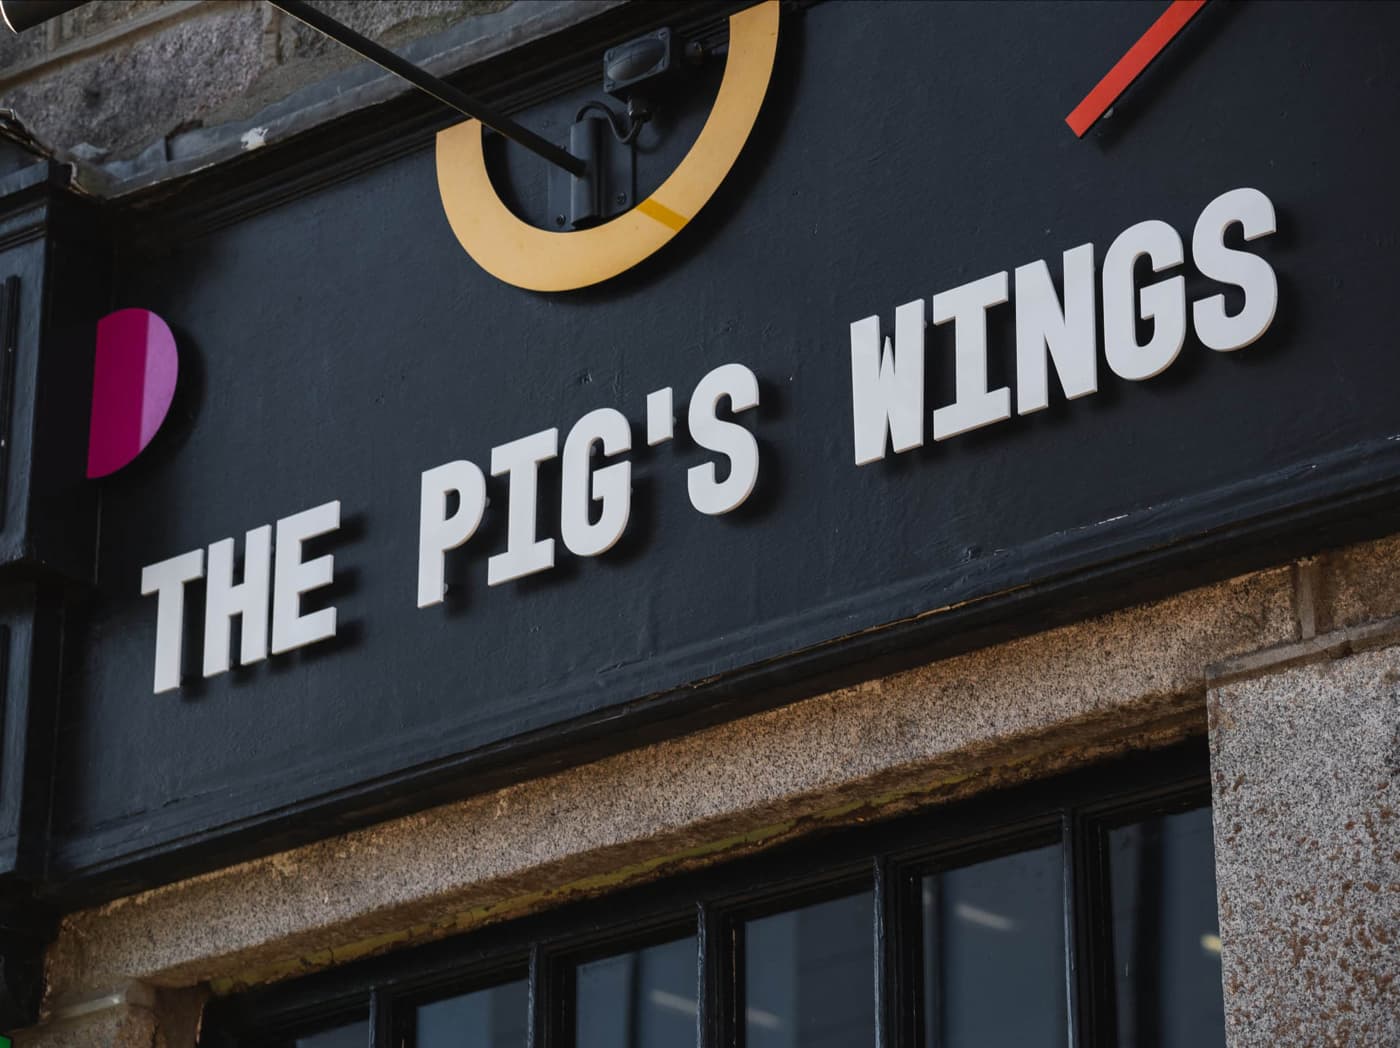 The Pigs Wings signage